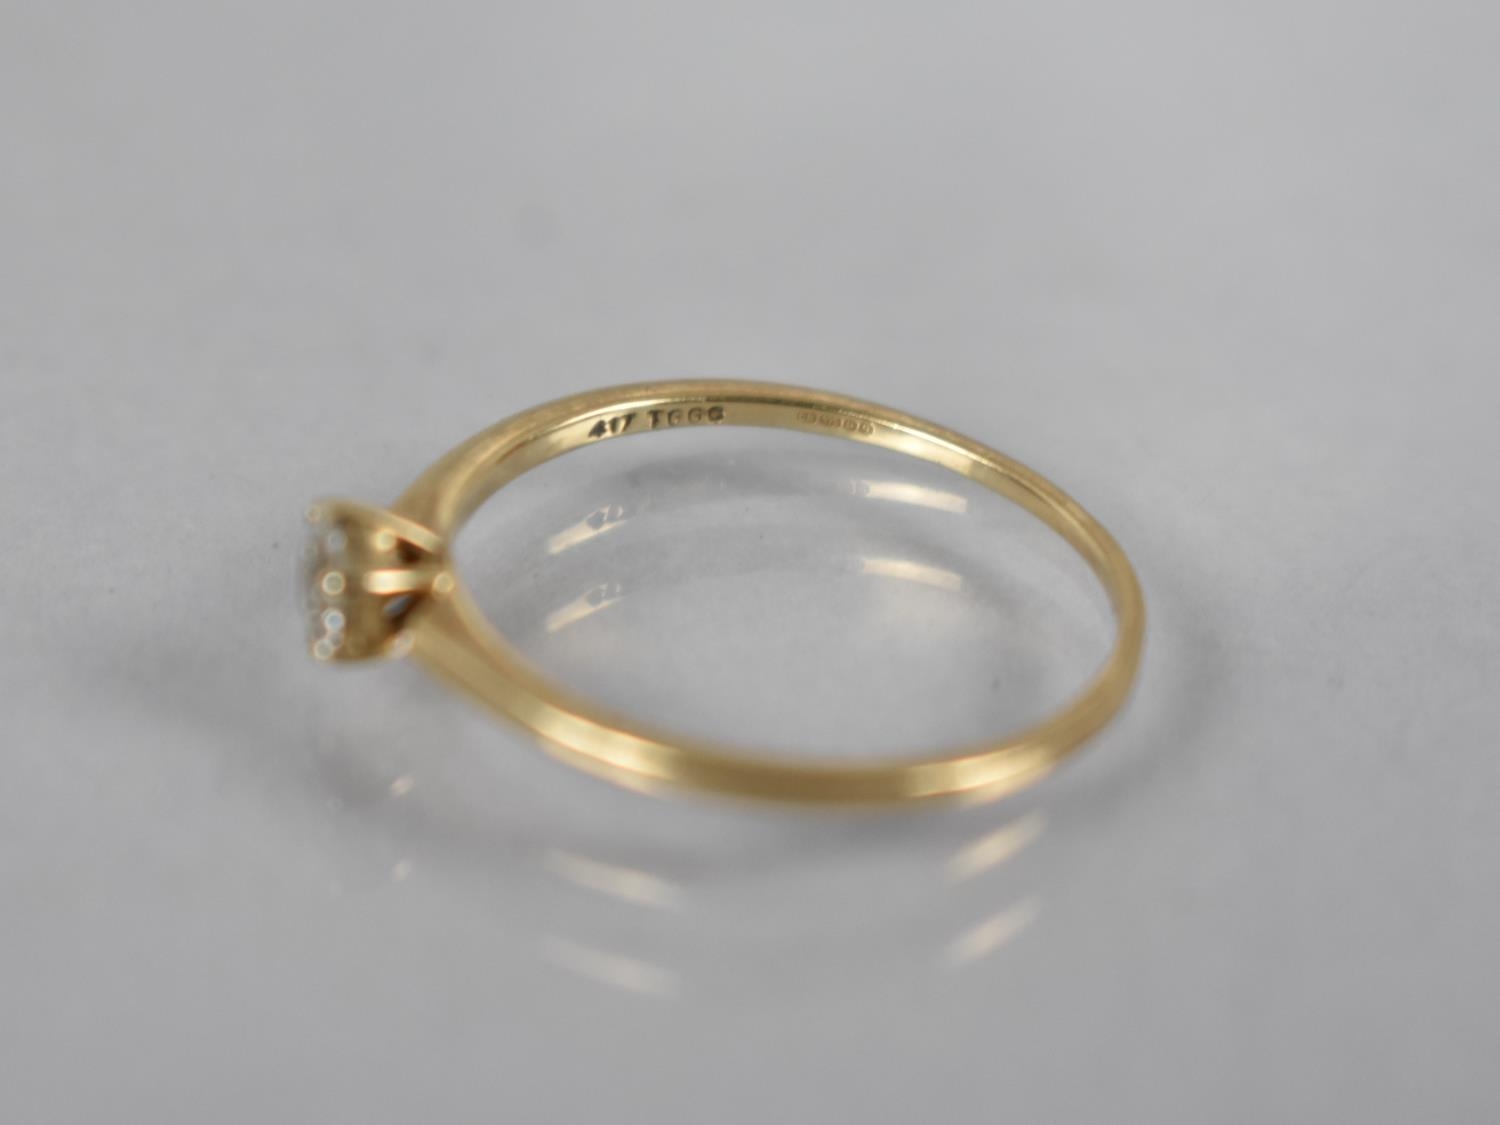 A 9ct Gold Mounted Diamond Ring, Round Cut Stone Measuring 3.7mm in Six Claws to a Delicate 9ct Gold - Image 2 of 2